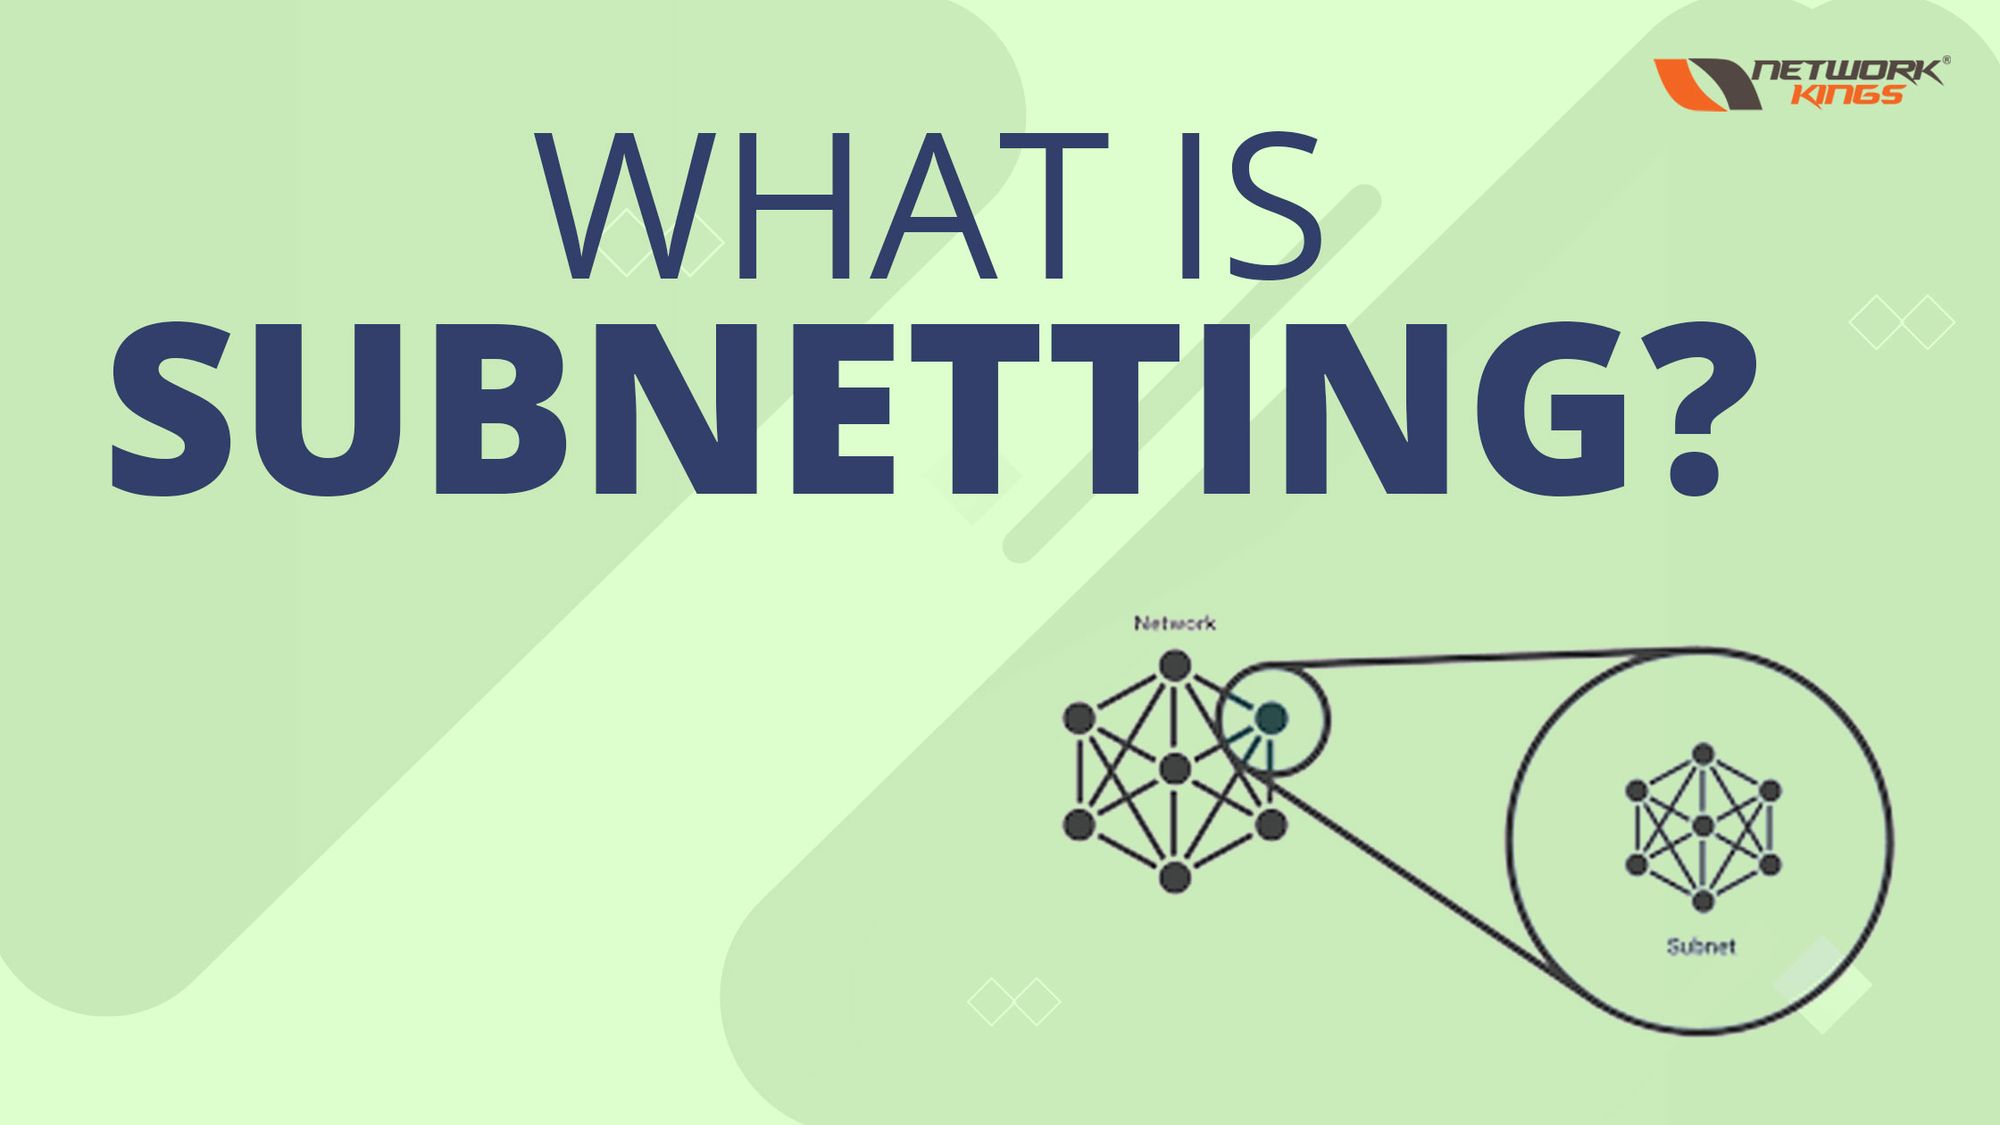 What is subnetting?